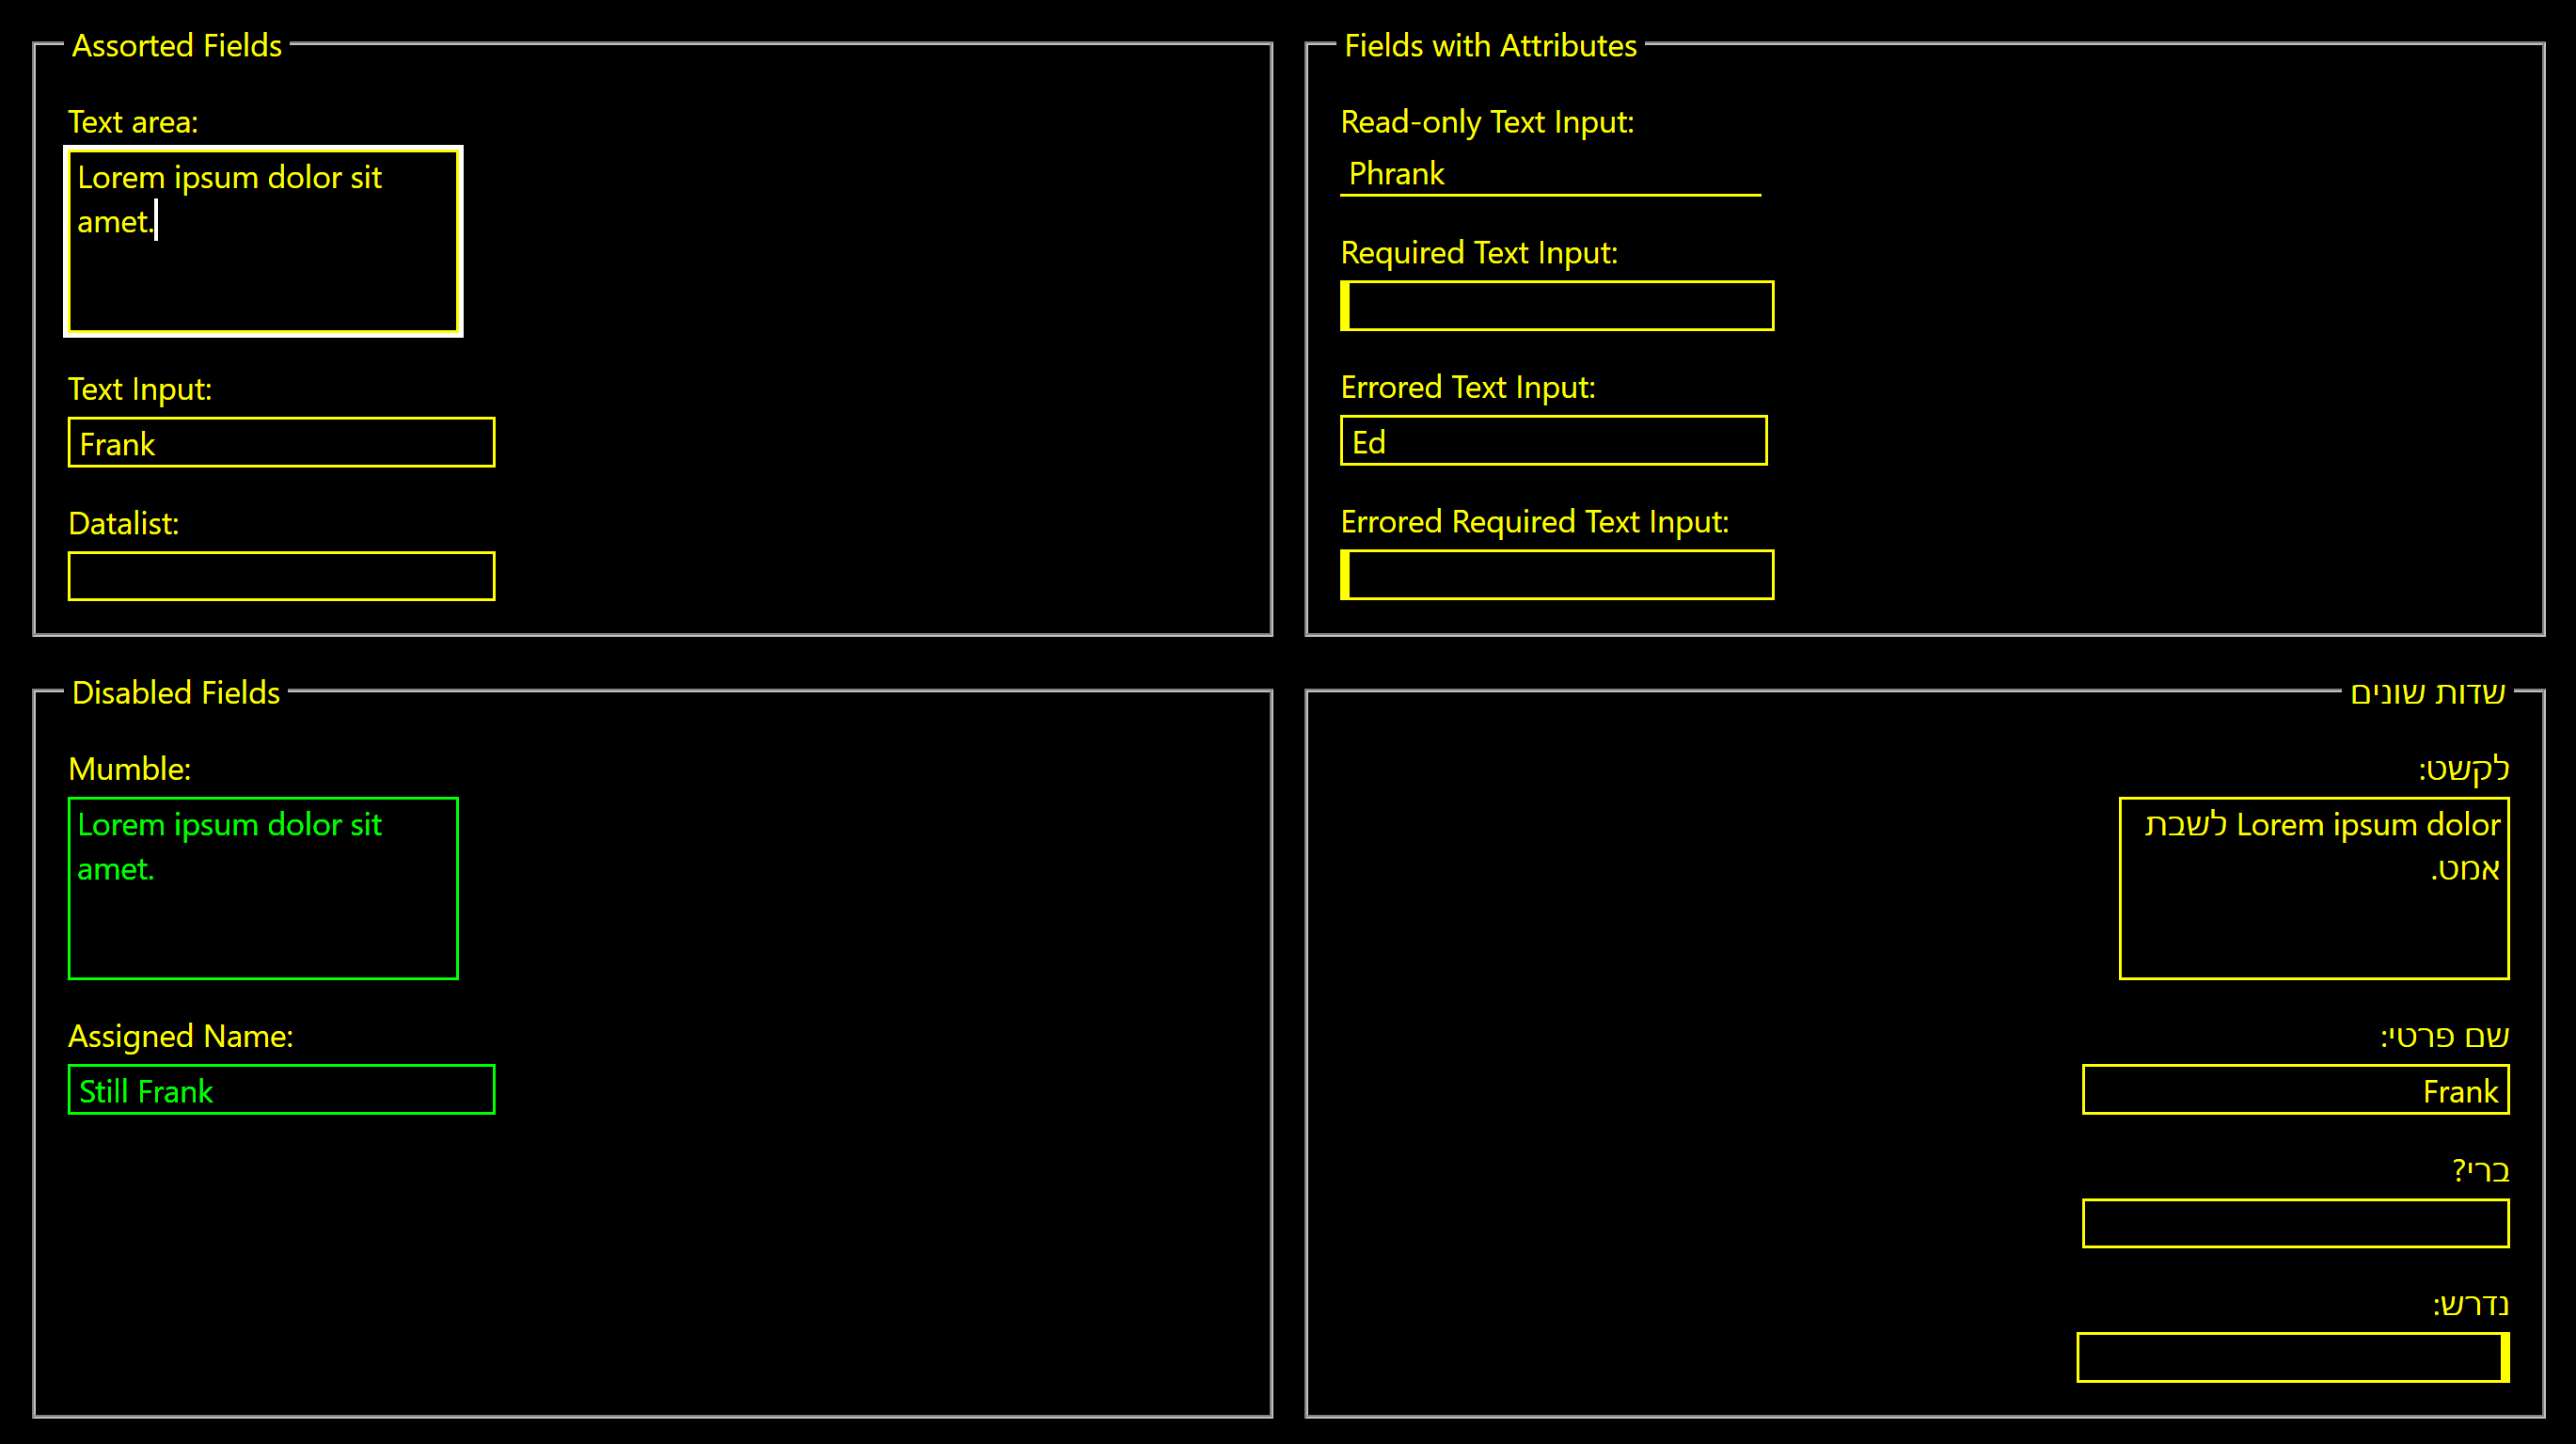 Black screen, form fields with yellow outlines with white text, disabled fields with green outline.